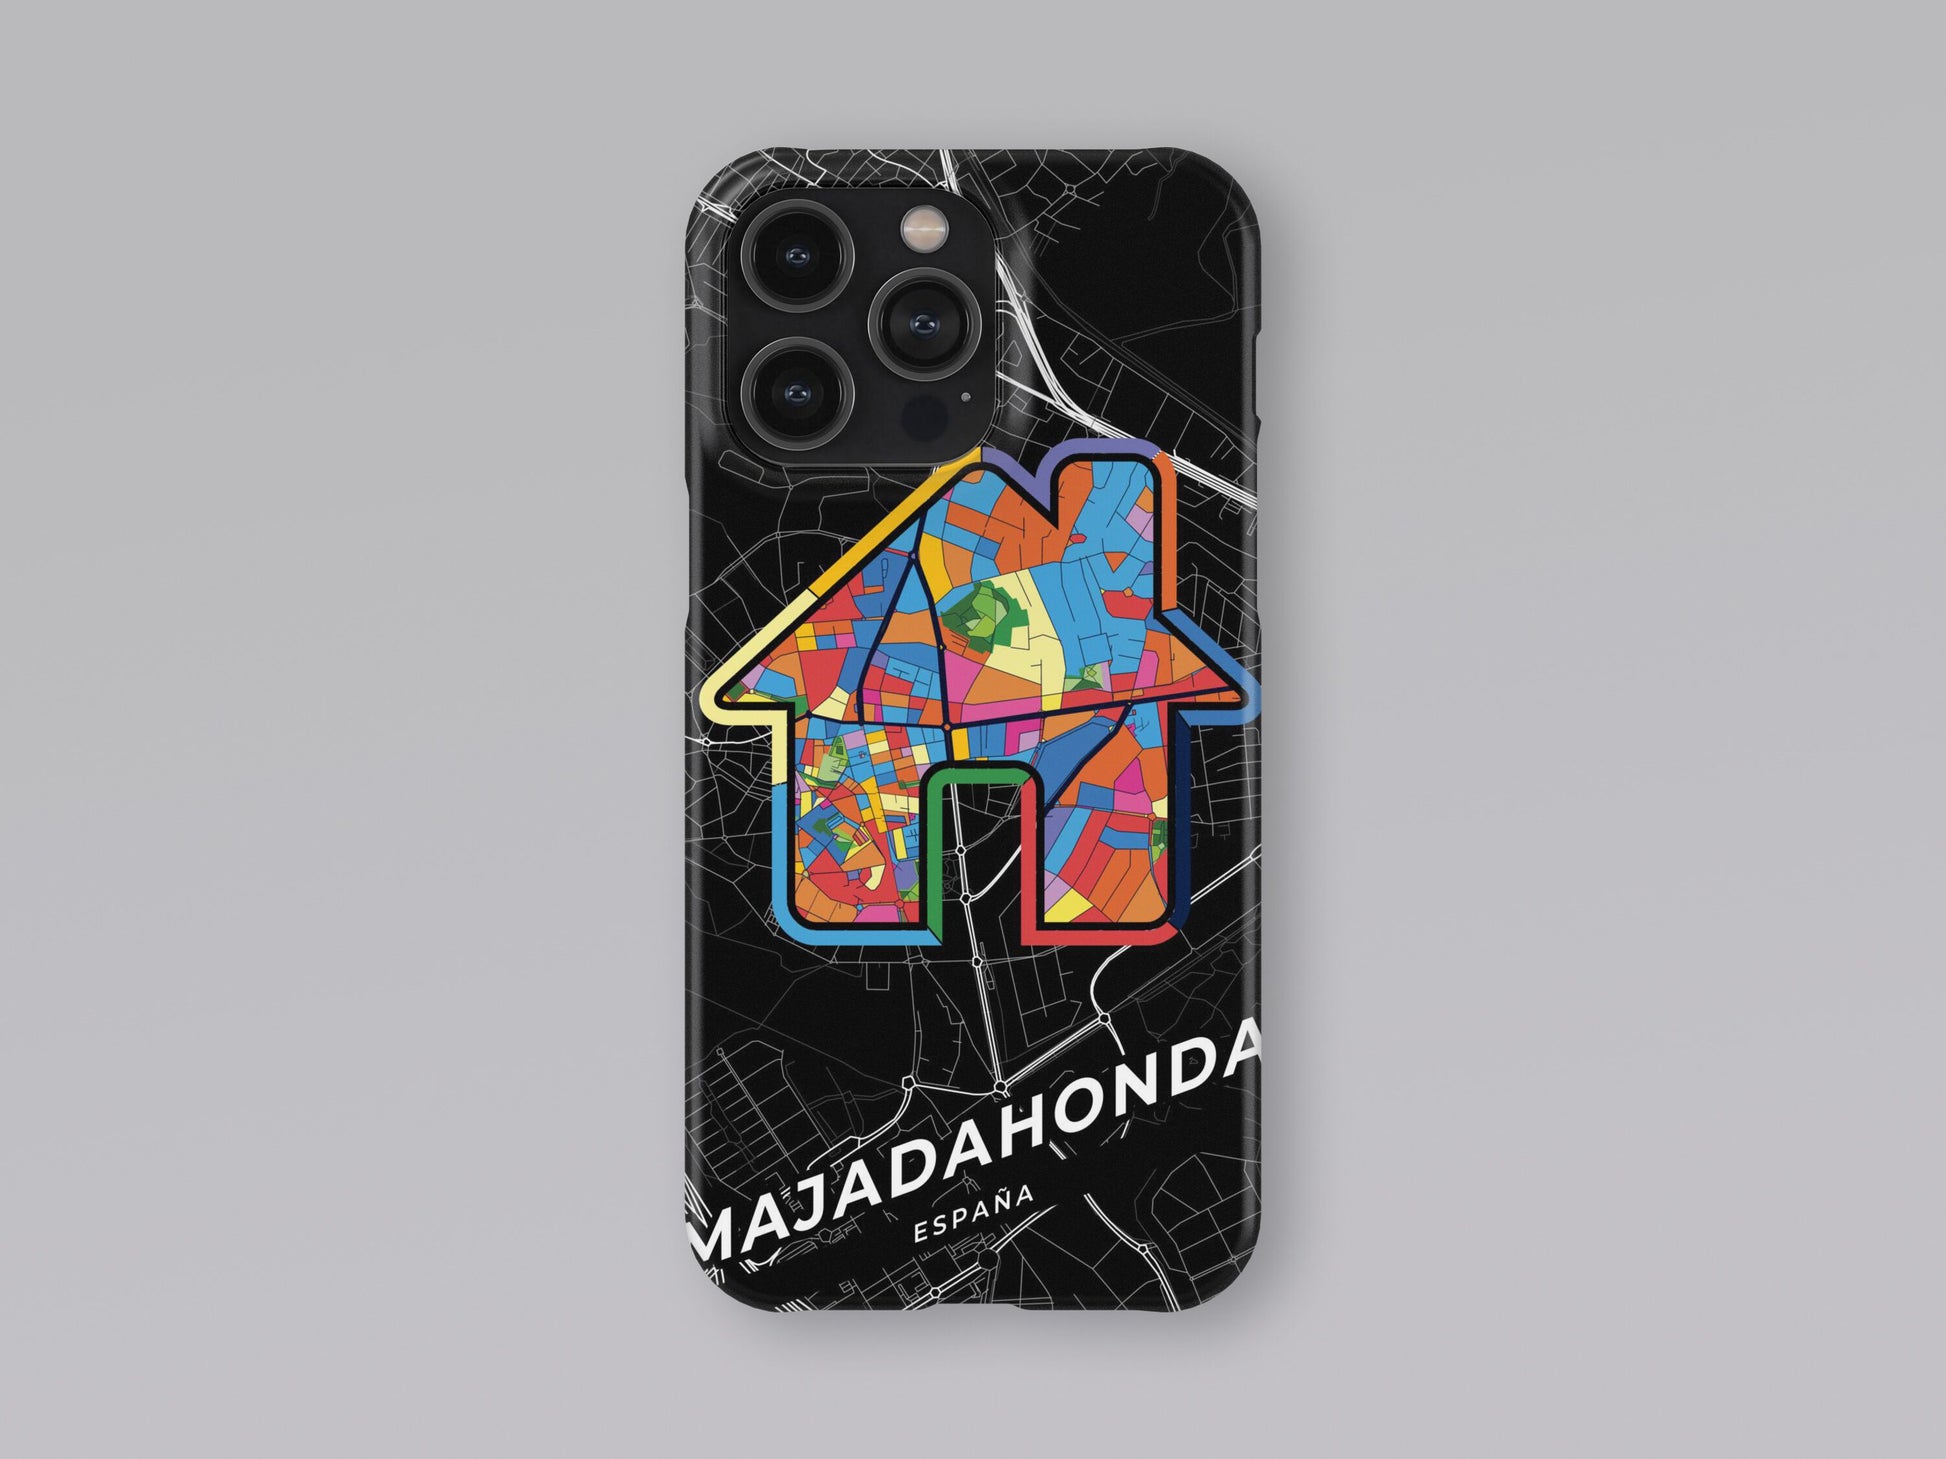 Majadahonda Spain slim phone case with colorful icon. Birthday, wedding or housewarming gift. Couple match cases. 3